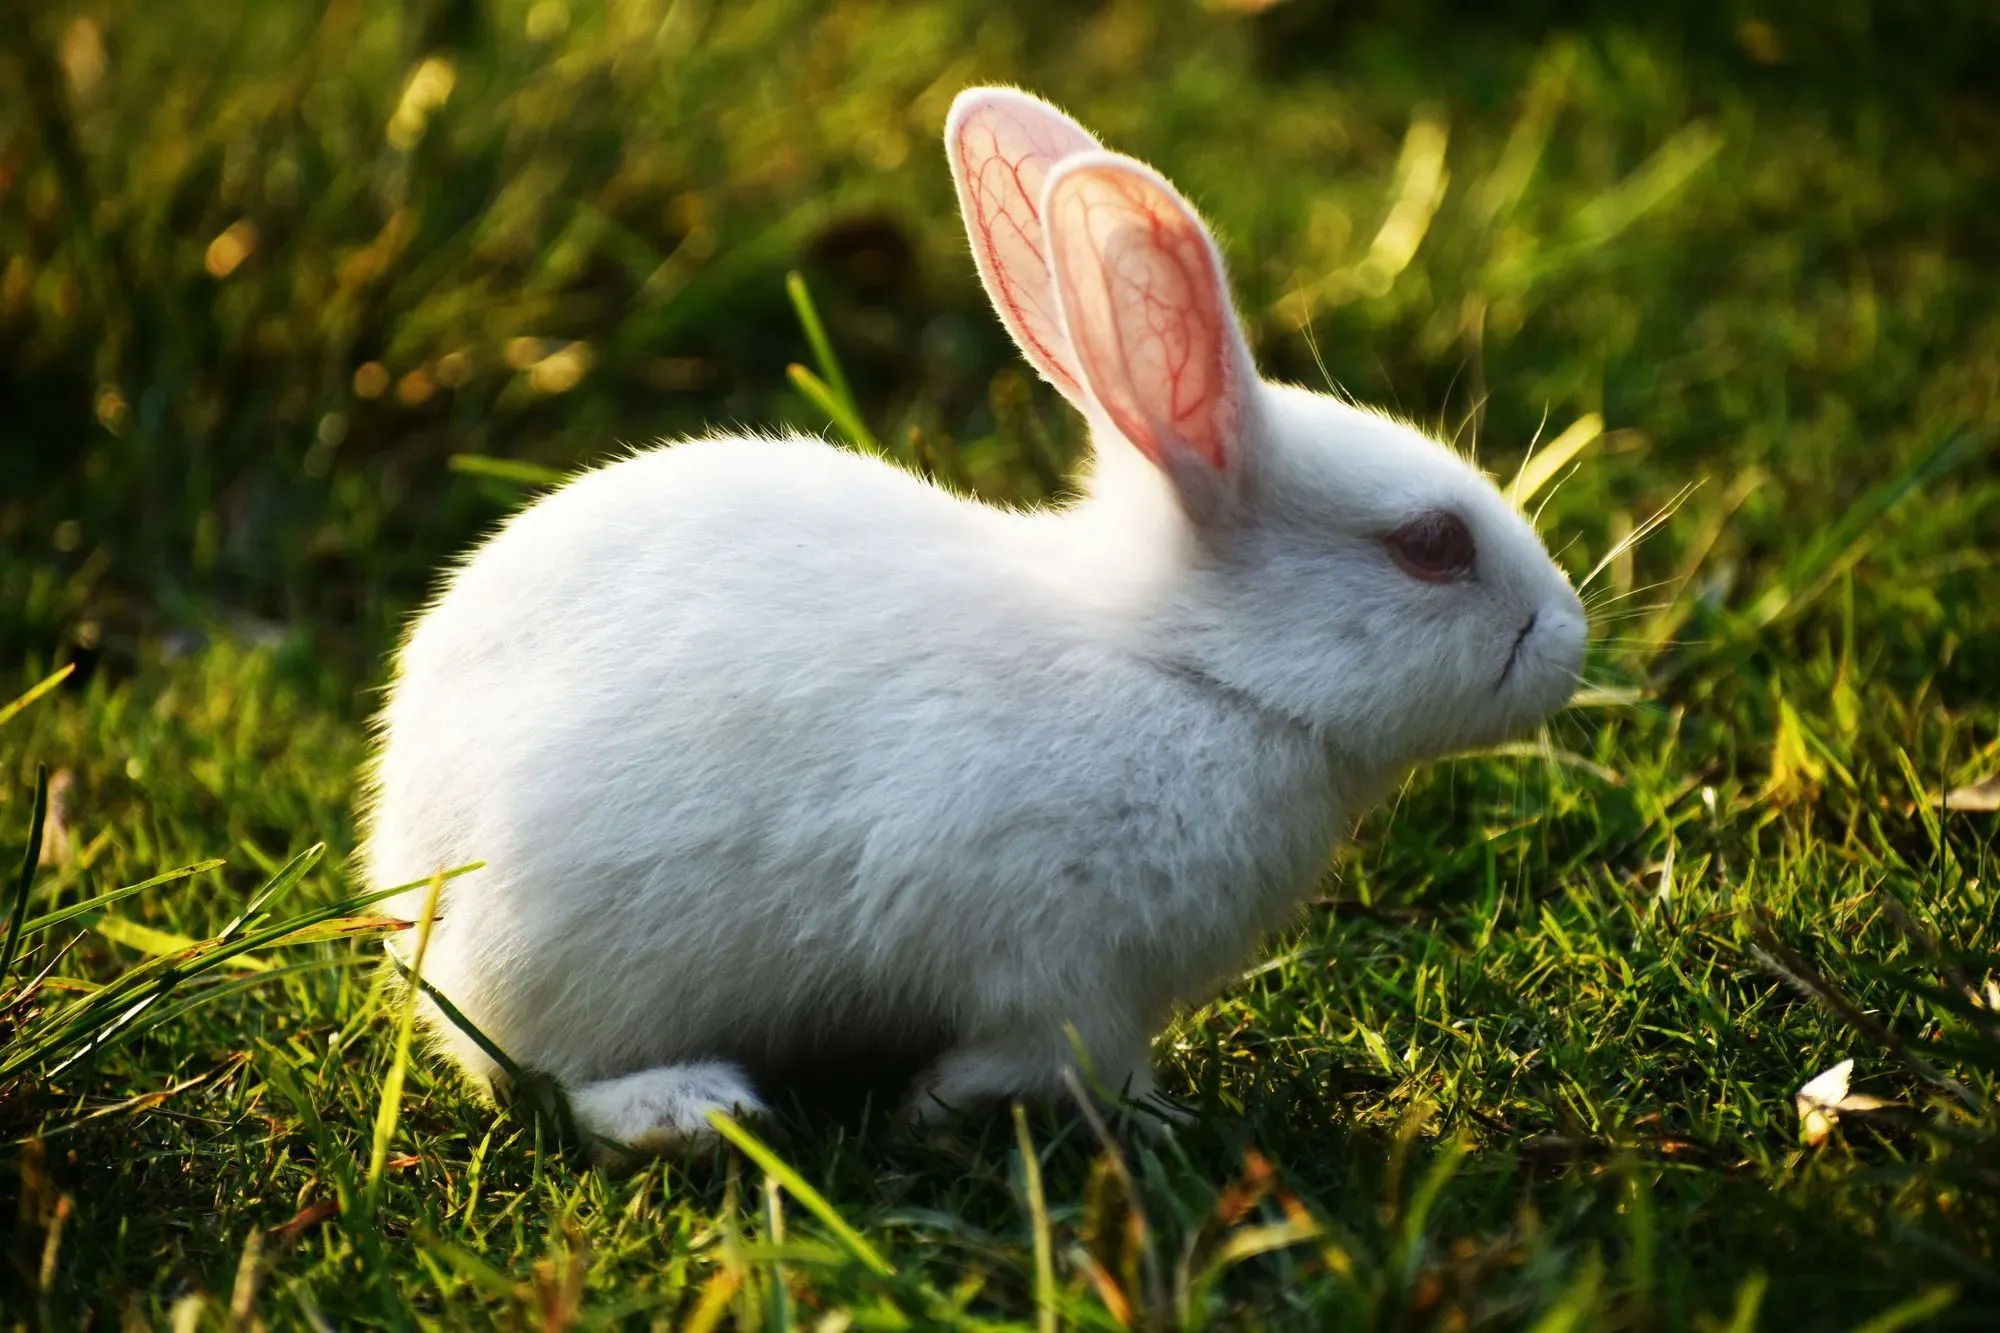 The cute little rabbit is a happy, family-friendly pet that lives in its rabbit burrow.